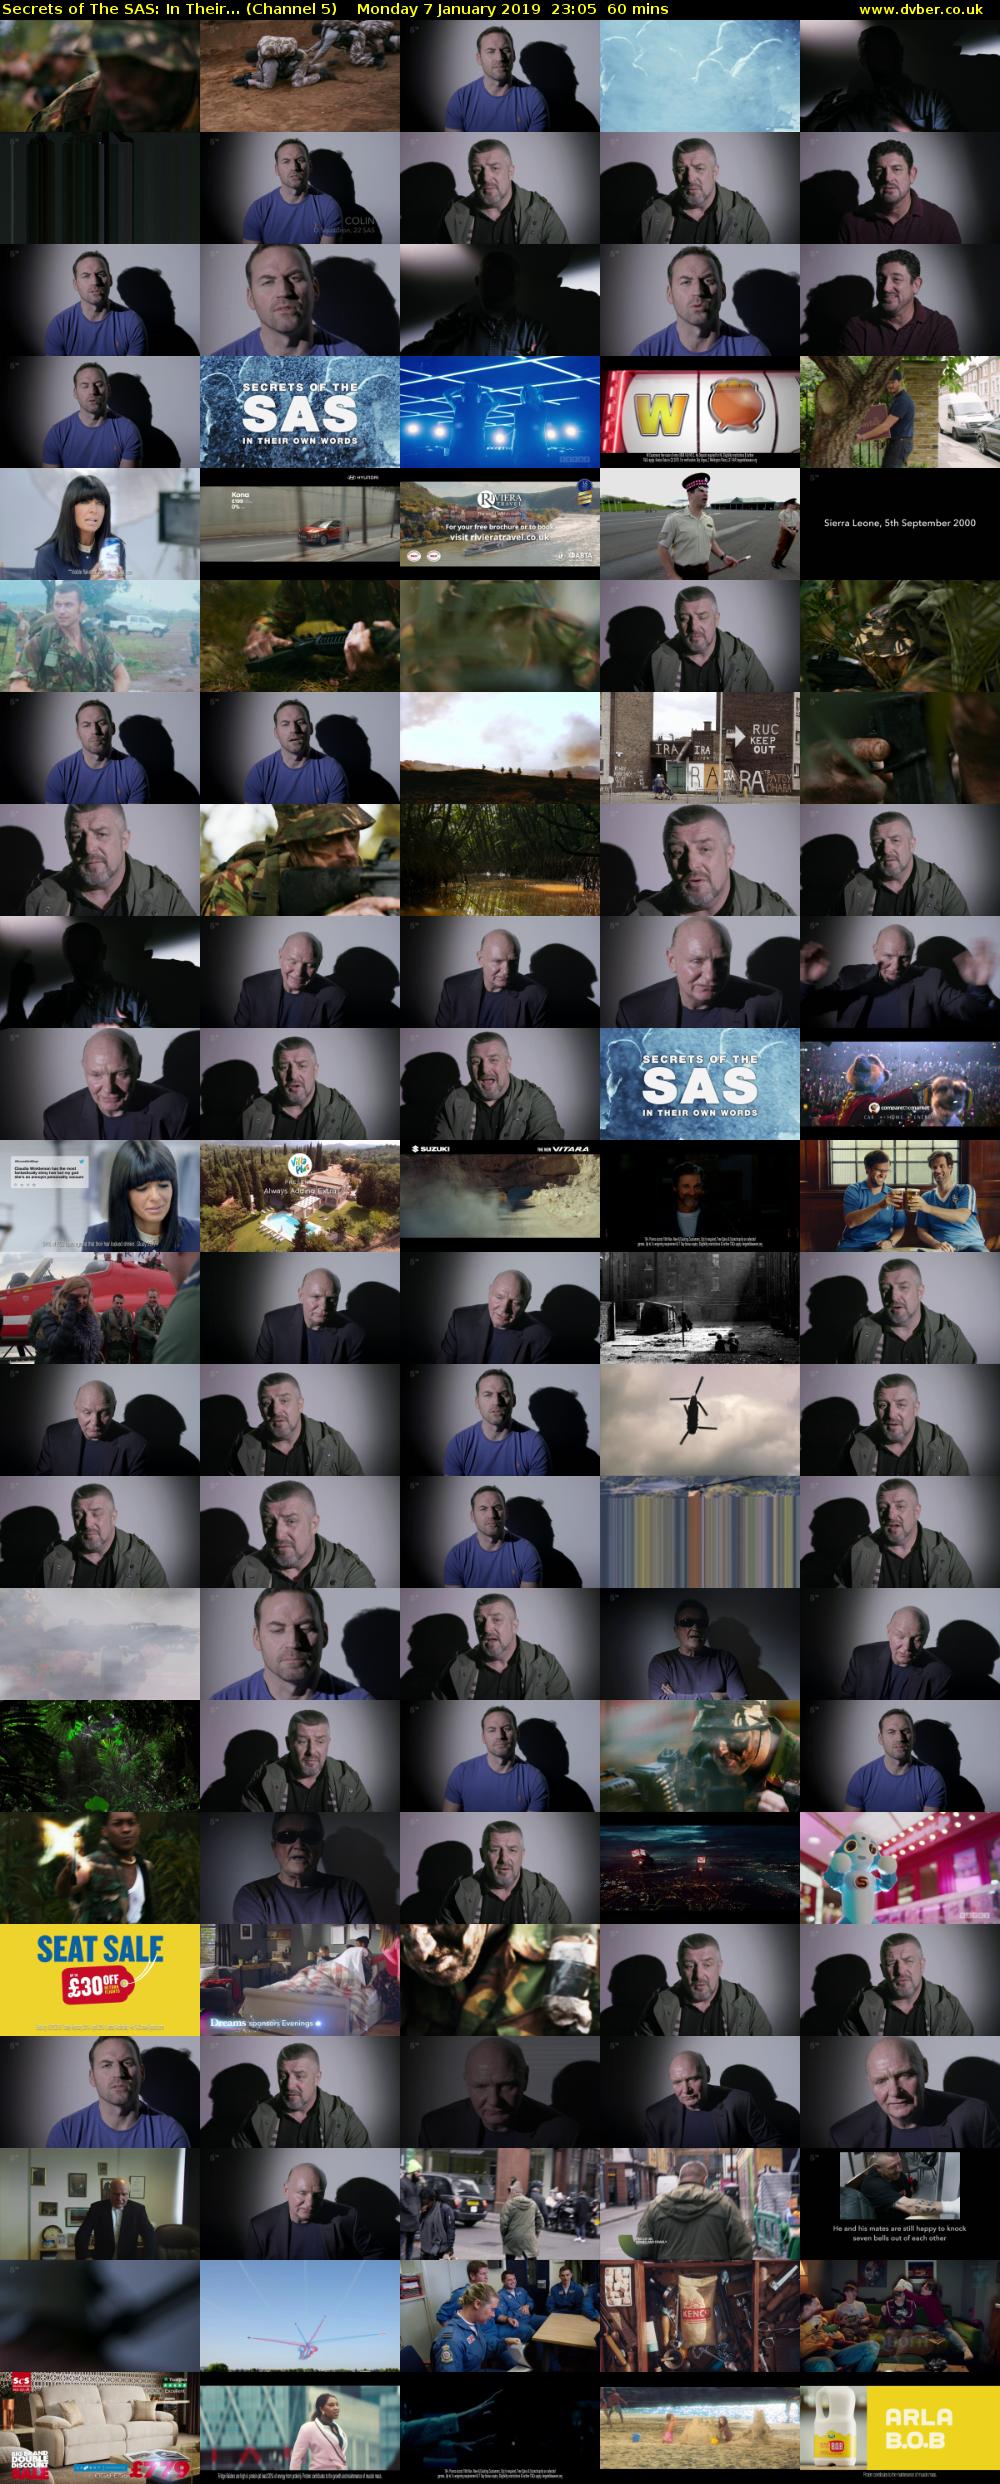 Secrets of The SAS: In Their... (Channel 5) Monday 7 January 2019 23:05 - 00:05